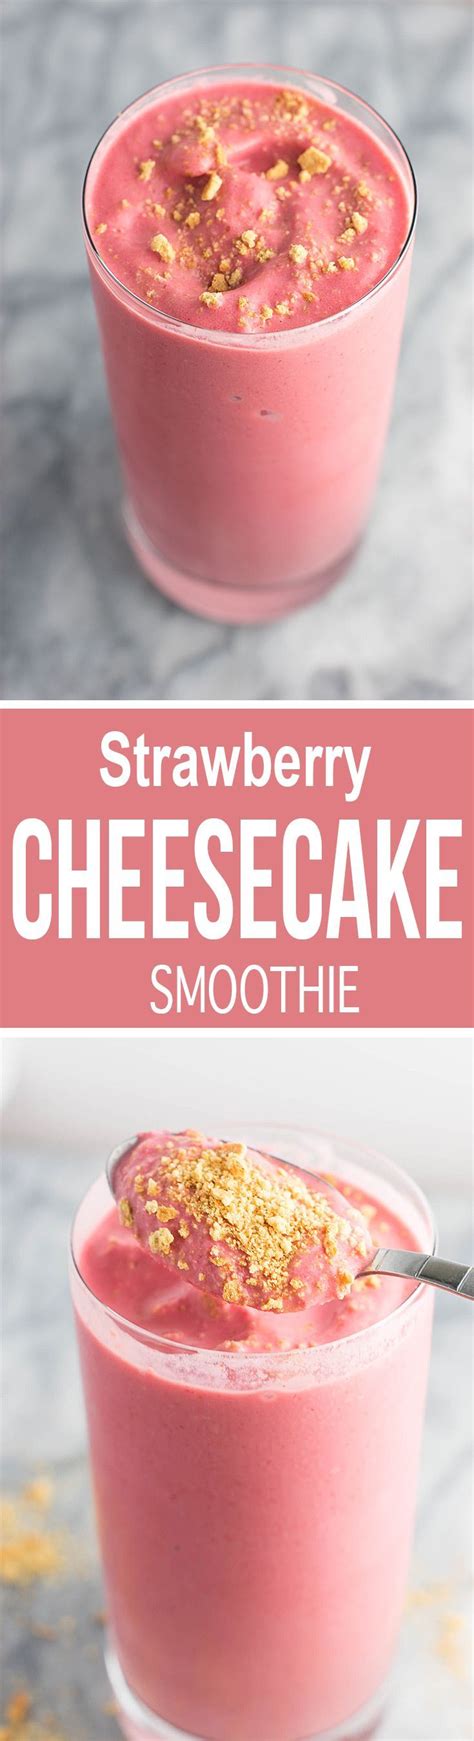 This skinny strawberry cheesecake smoothie recipe is made with just 5 ingredients and healthy ...